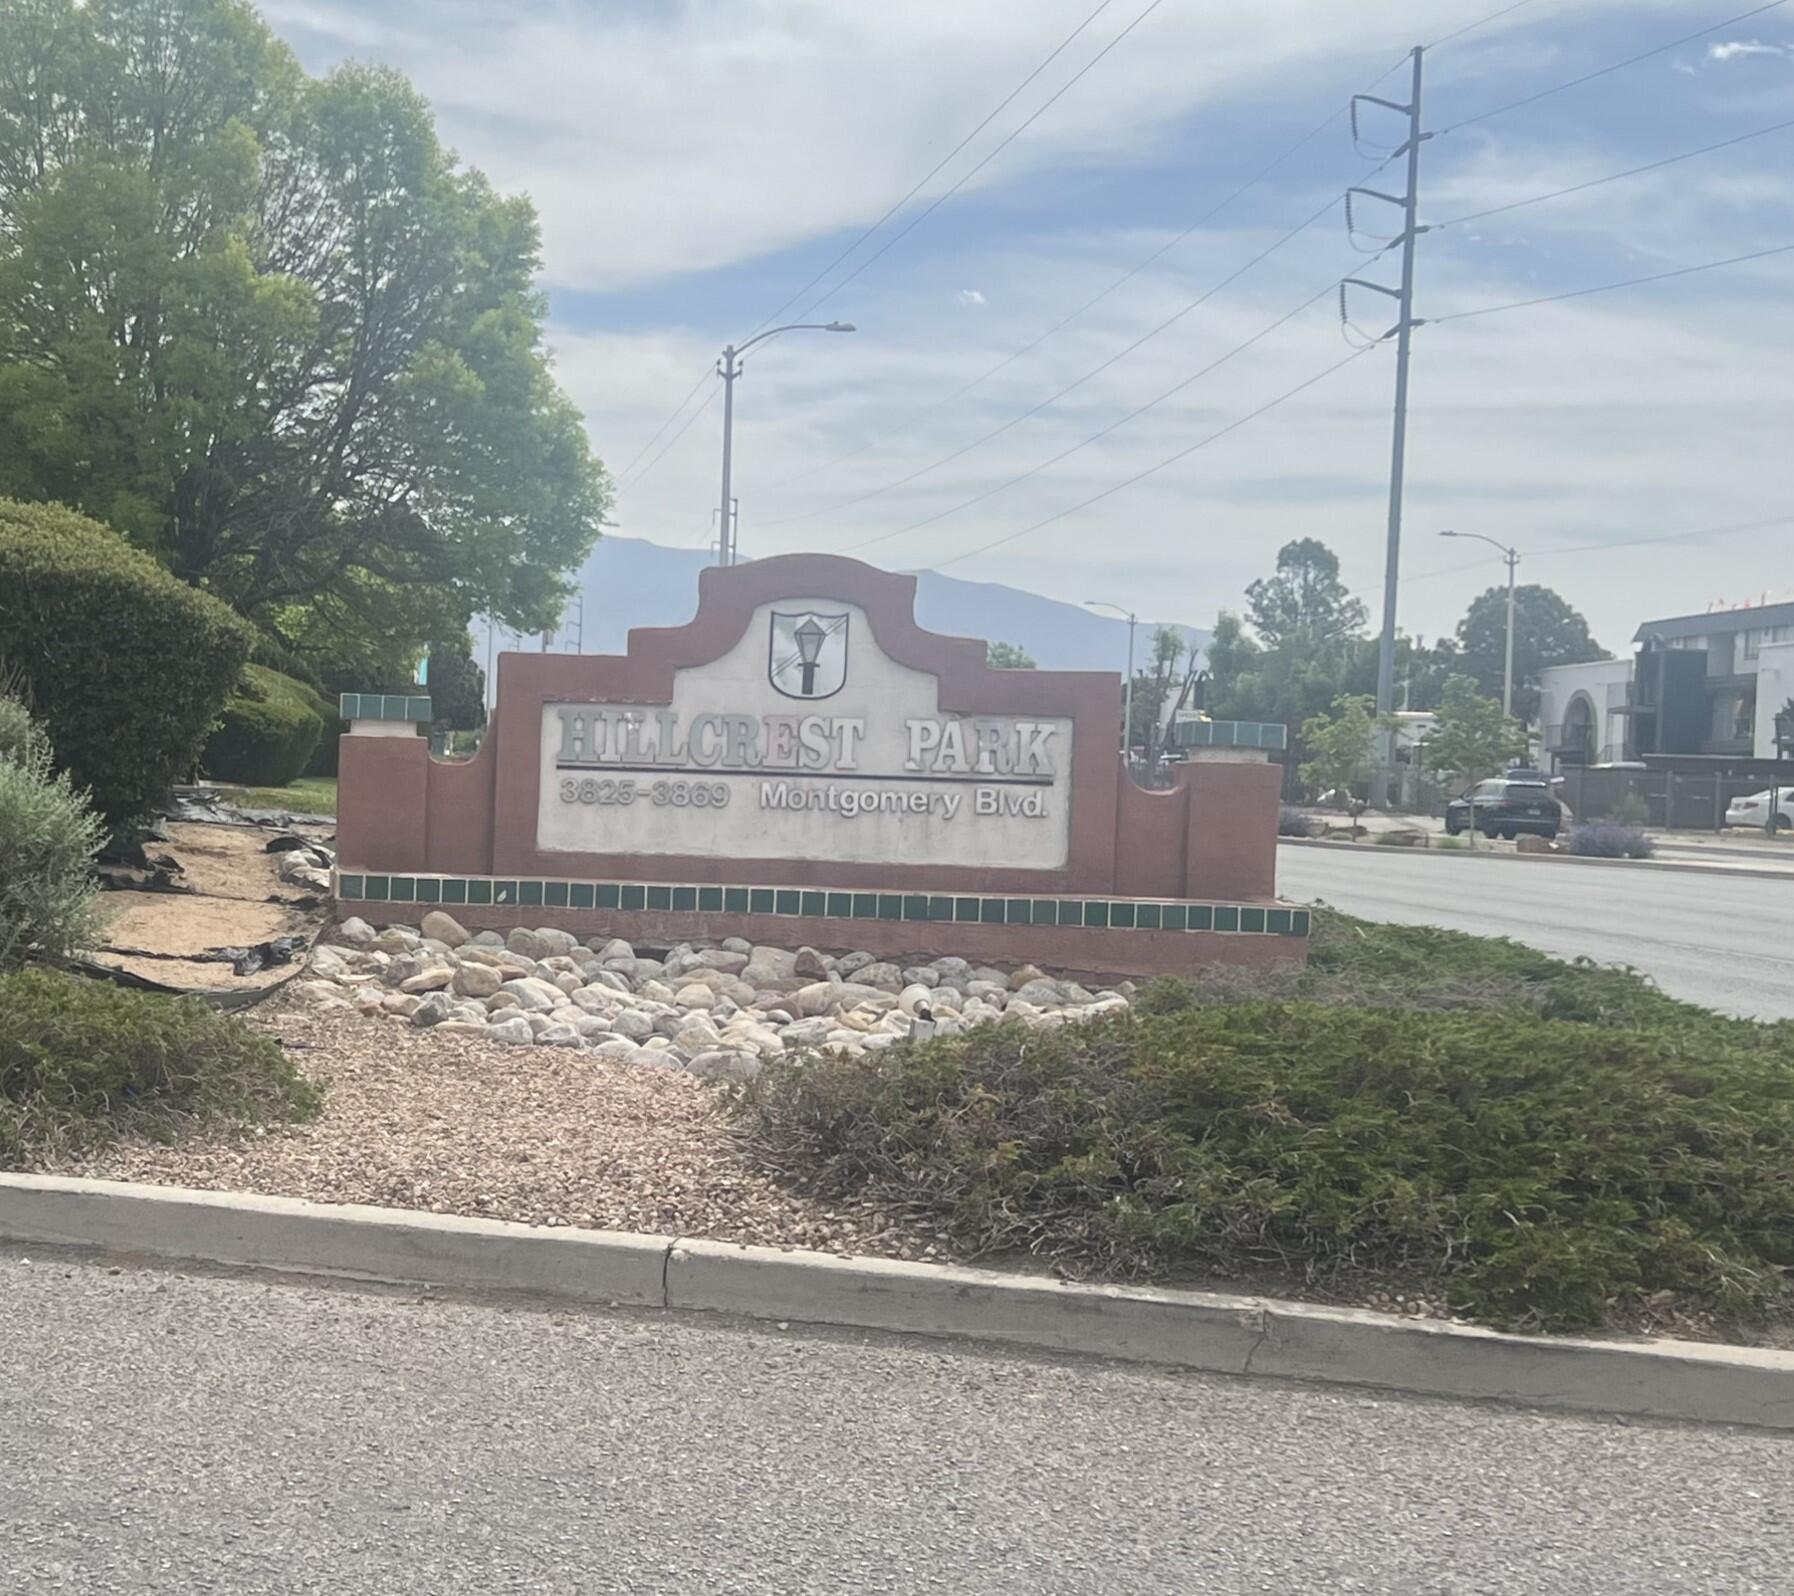 Great Location.  Just east of I25. Tenant occupied on a month to month lease.  They only need a 30 day notice if buyer wants unit vacant. Current rent is $1350.00-this includes water, gas, trash and sewage.  HOA is $450.00 which includes the complex's pool, club house and common grounds.